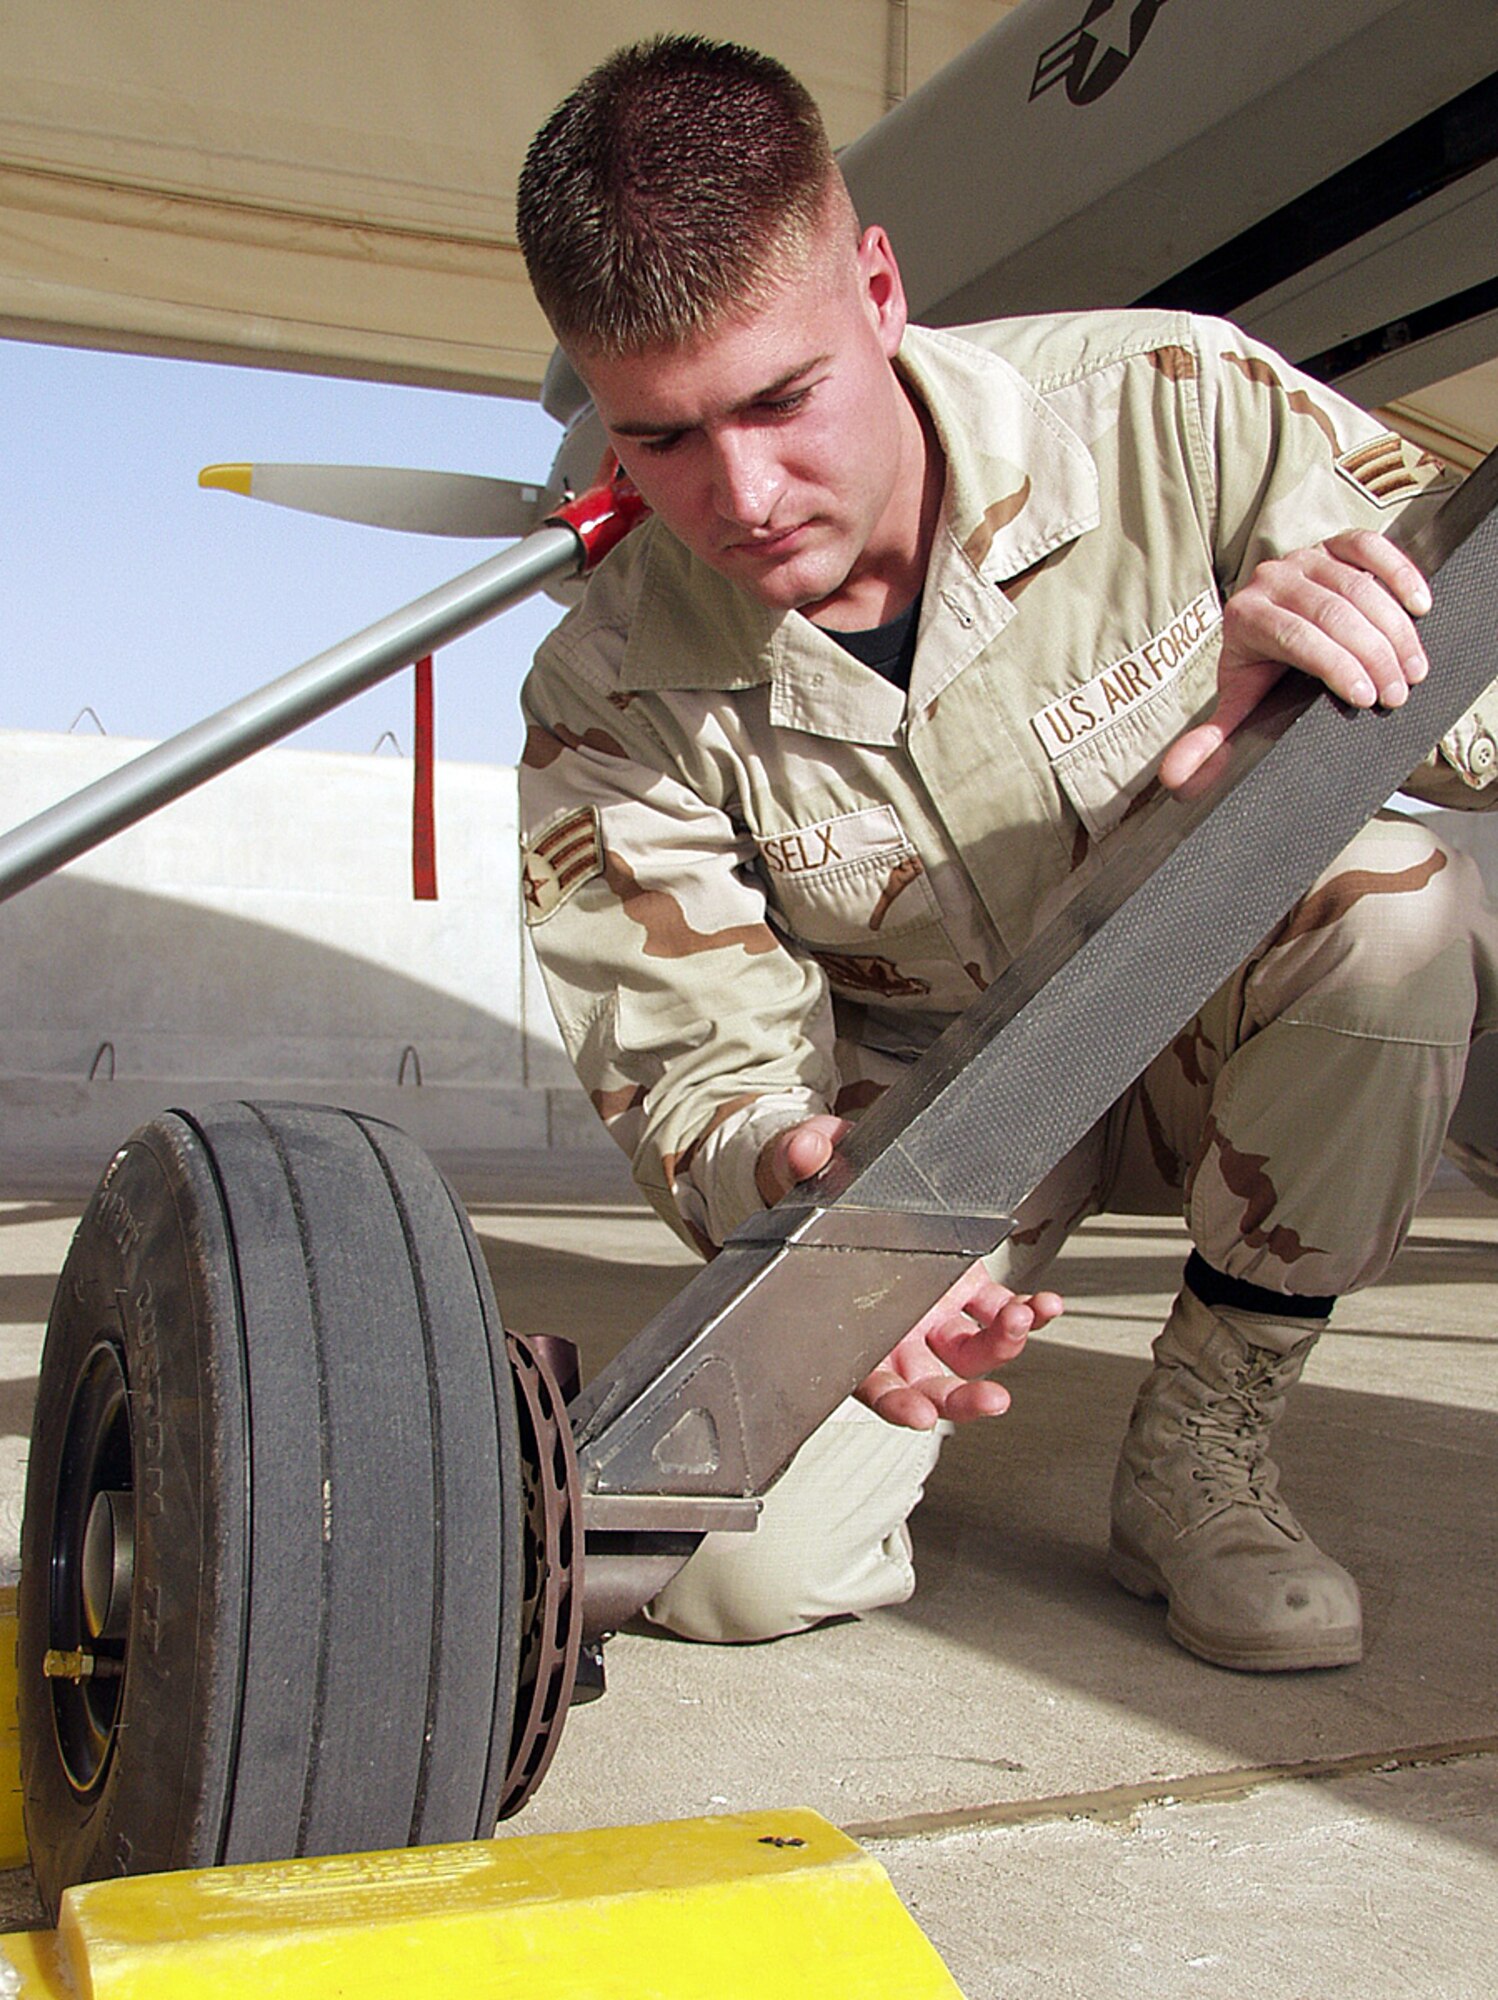 OPERATION IRAQI FREEDOM -- Senior Airman Jason Biselx, a 46th Expeditionary Reconnaissance Squadron crew chief, checks a brake assembly on one of the unit's MQ-1 Predator unmanned aerial vehicles during a preflight inspection.  Based at a forward-deployed location, the Predator unit is participating in Operation Iraqi Freedom.  (U.S. Air Force photo by Tech. Sgt. Dan Neely)